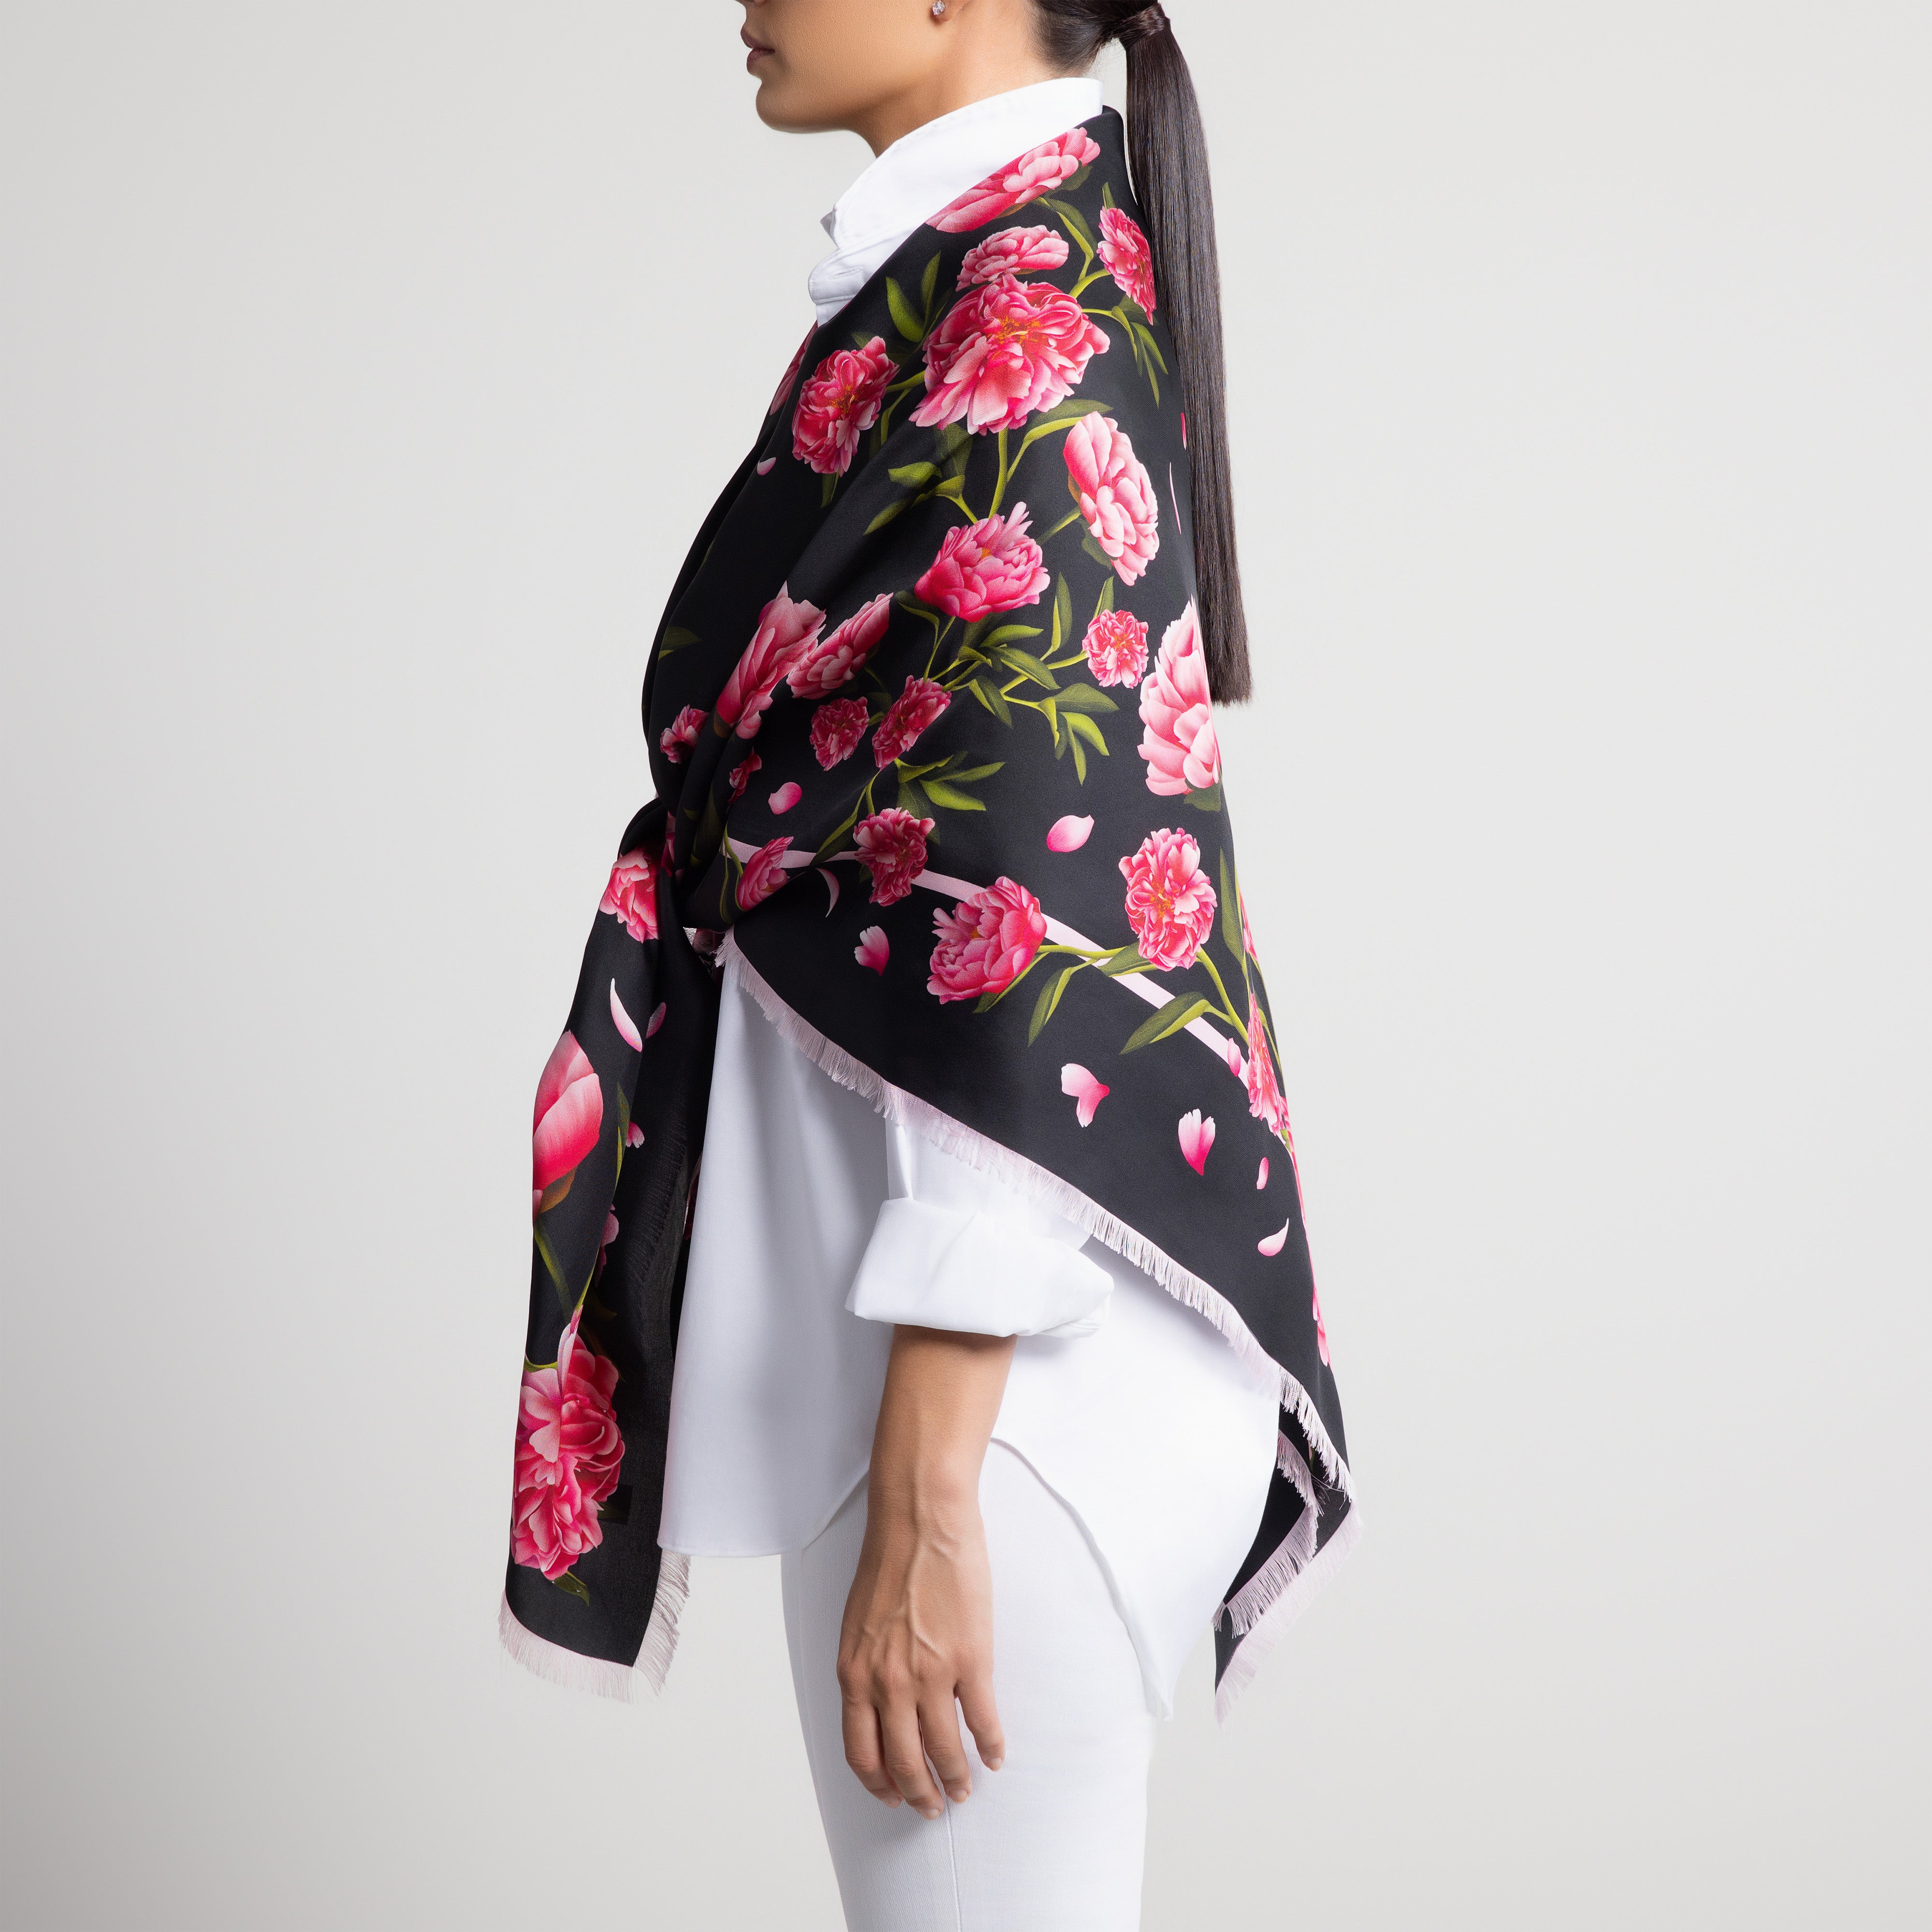 Peony Grande Silk Scarf in Black with Hand-Feathered Edges